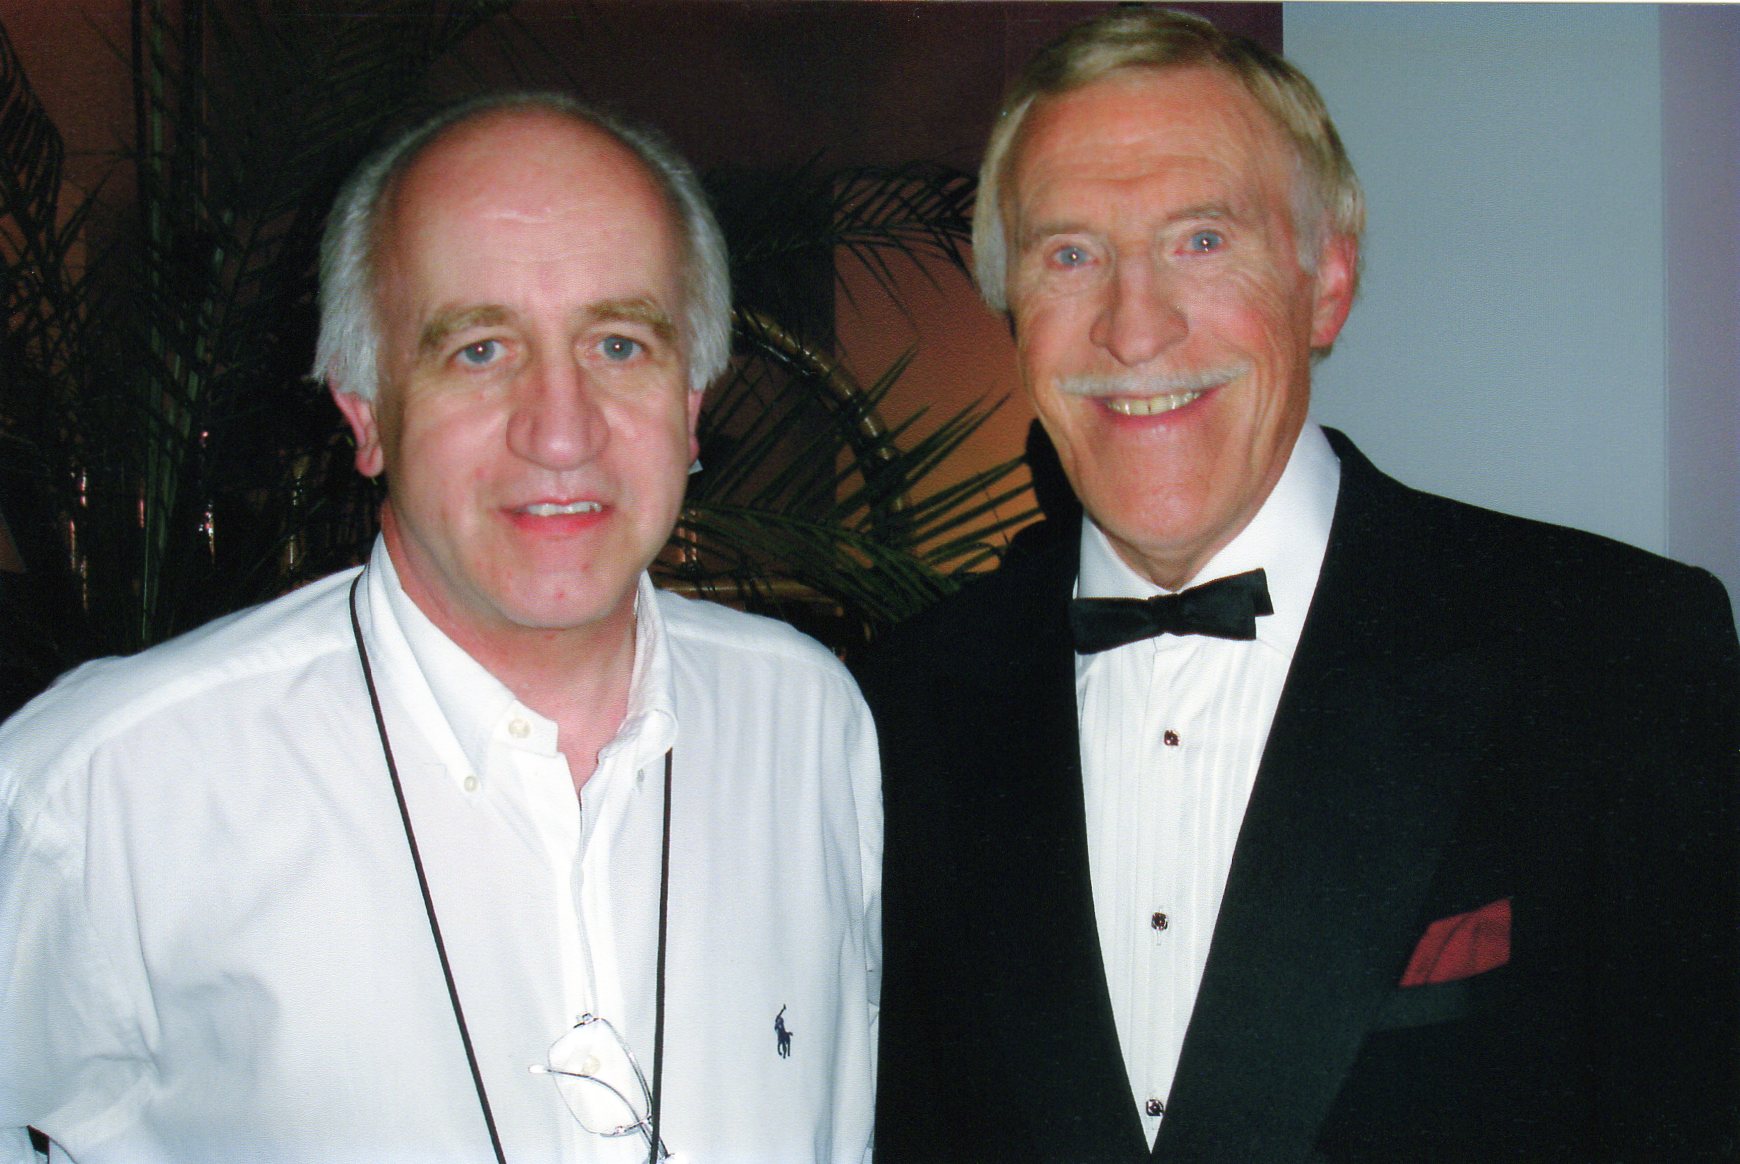 Me with Sir Bruce Forsyth. Directing him for TV.